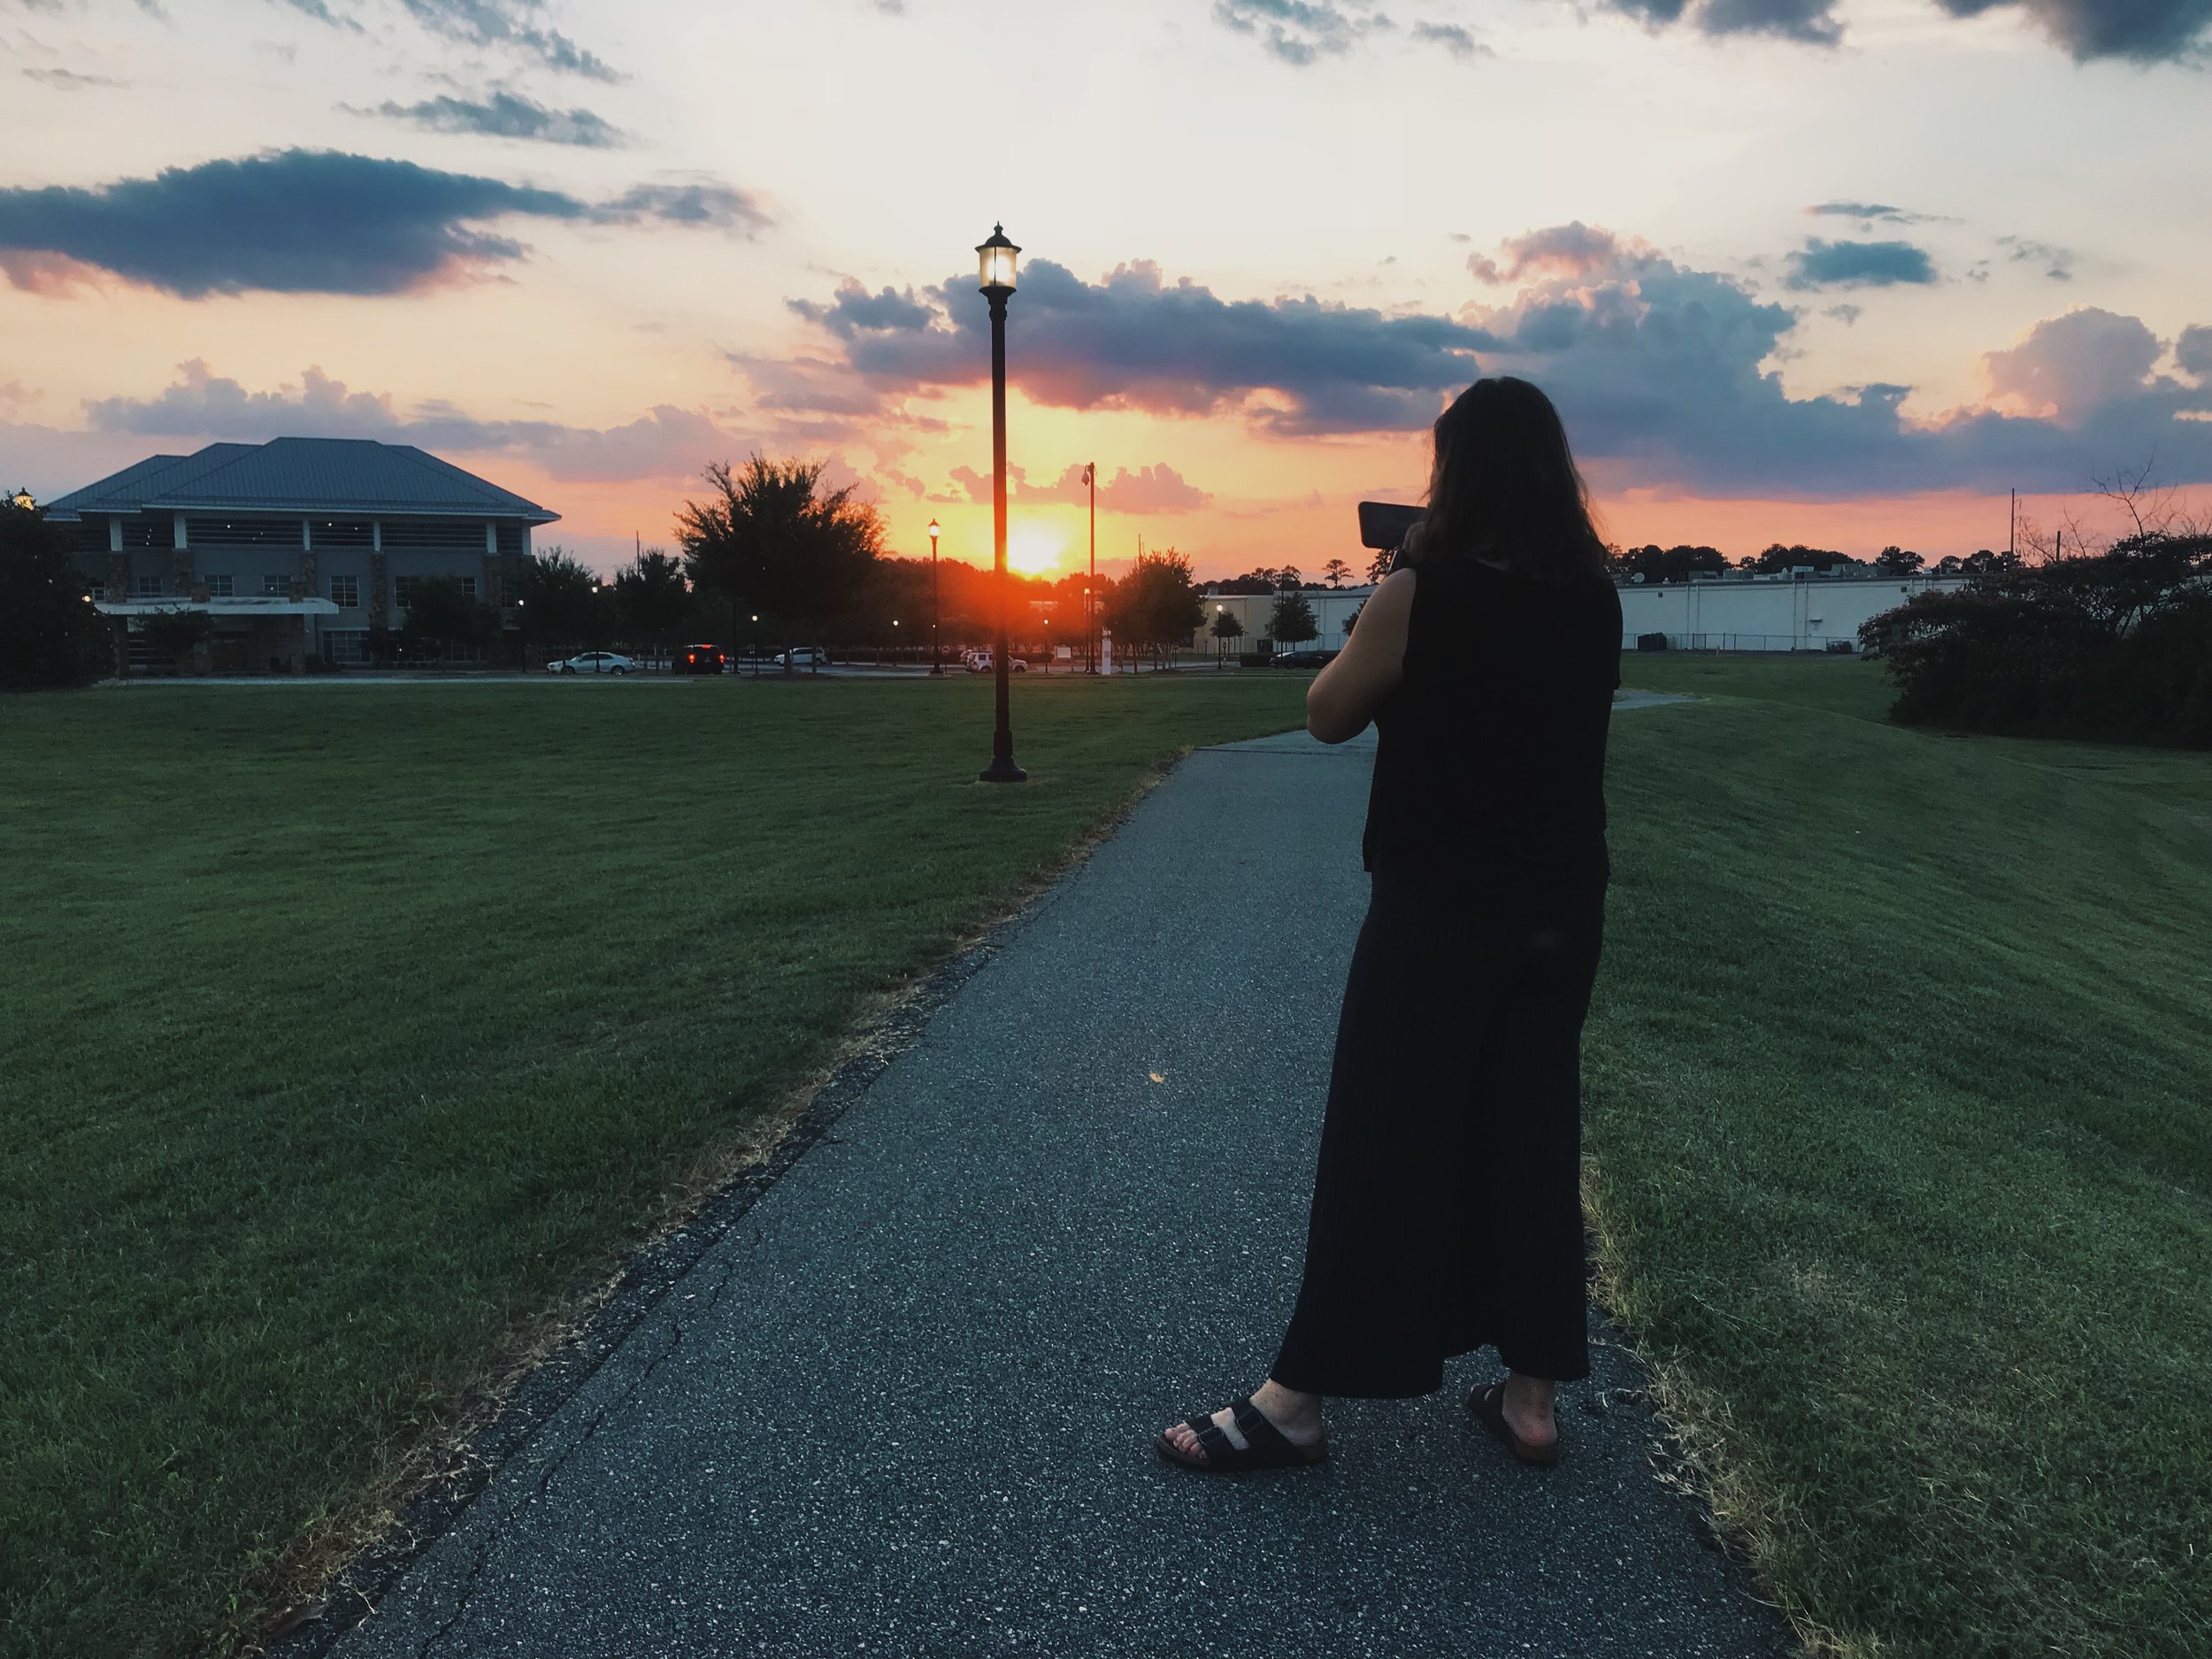 i went back to my hometown for a bit and my best friend and i went to the hill where we always used to like to go in high school. &nbsp;the sunsets there are always gorgeous.